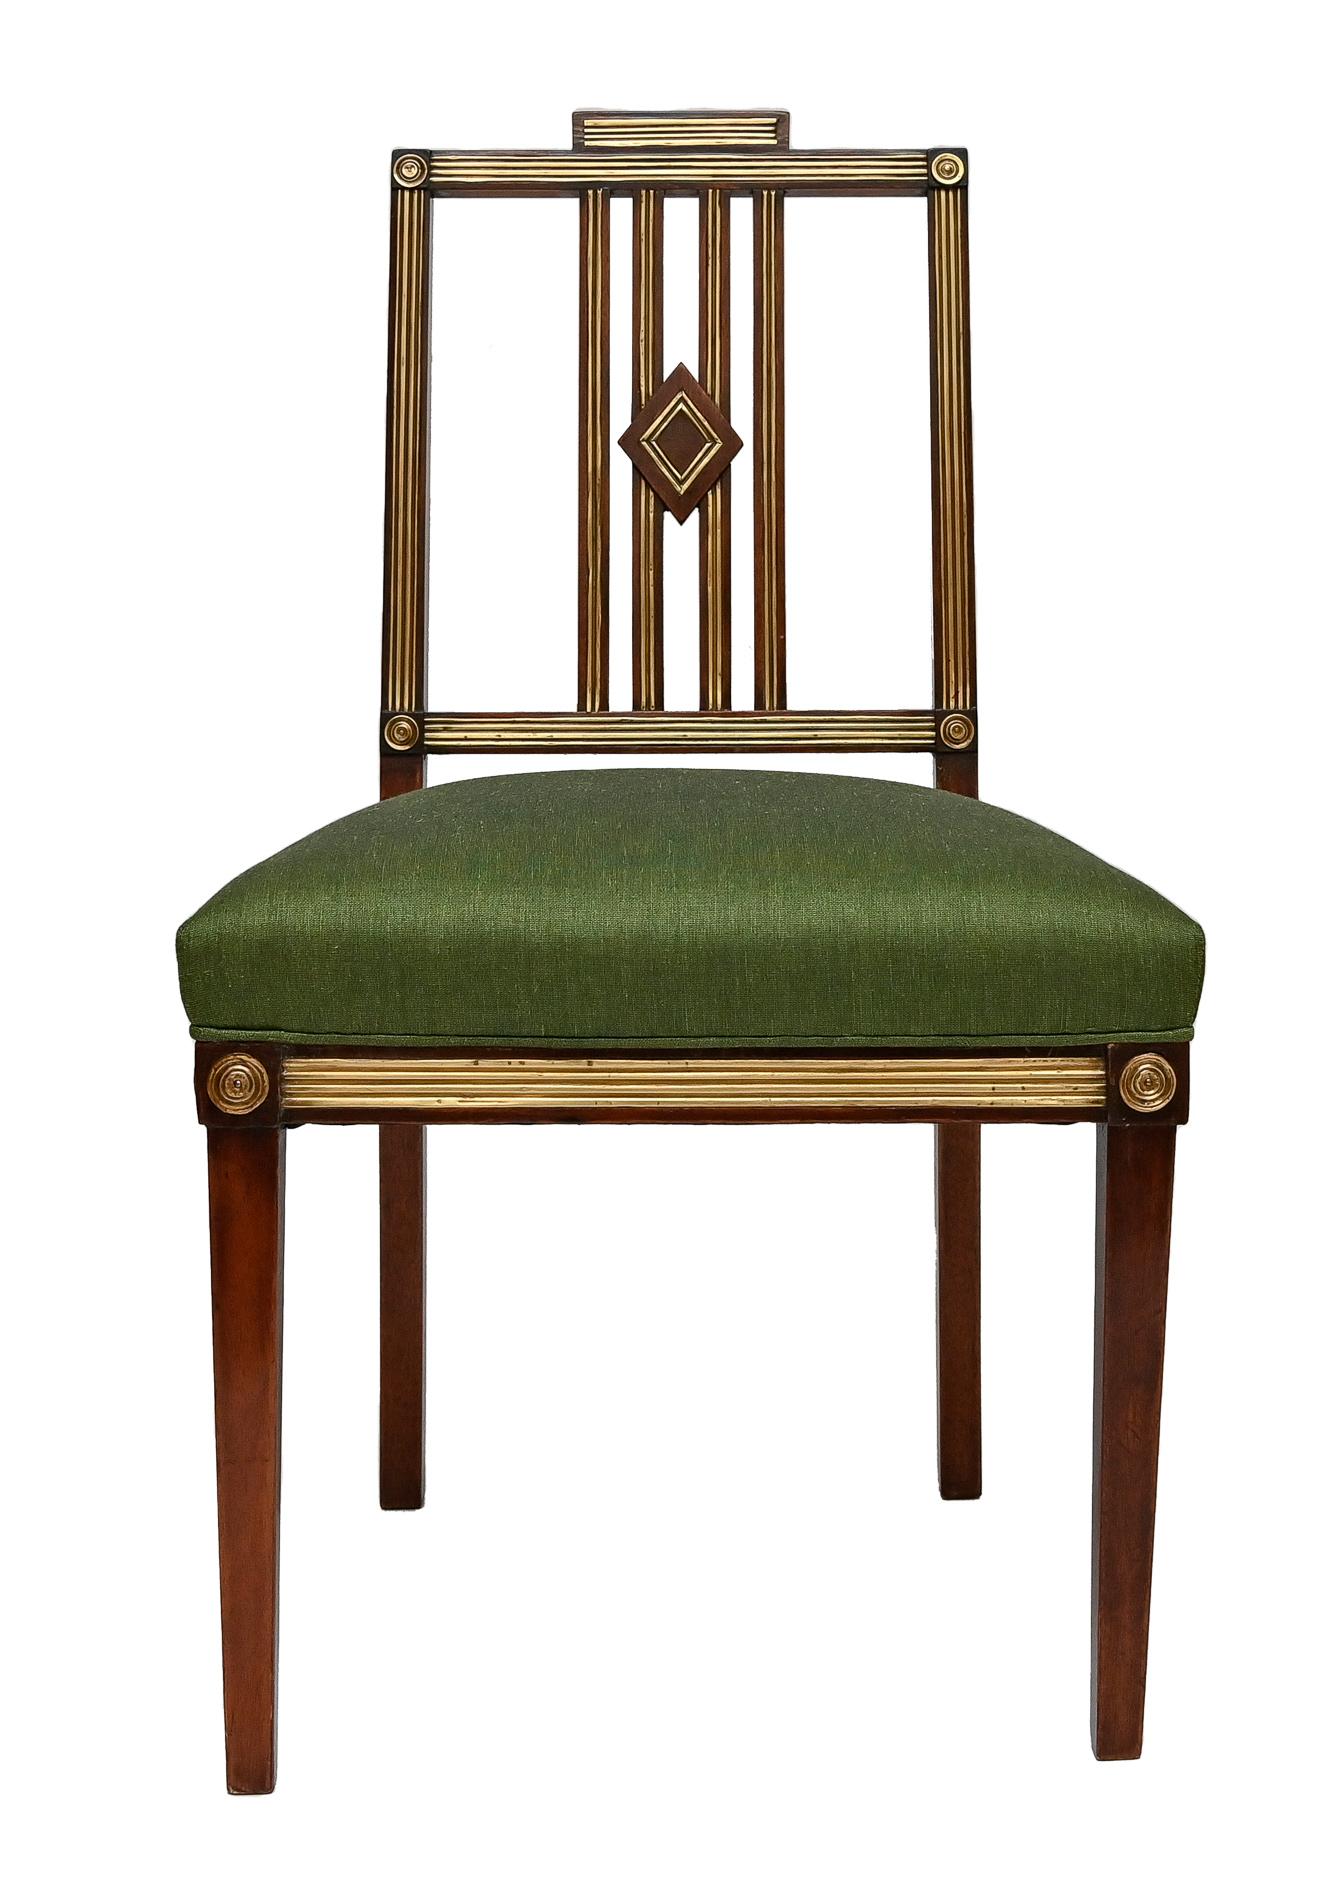 4 chairs for a dining room, around 1800, provenance probably from a noble household in the Baltic States
Mahogany, backrests and seat frames decorated with brass wire, designed in strict modesty but still of high quality
Surfaces have been